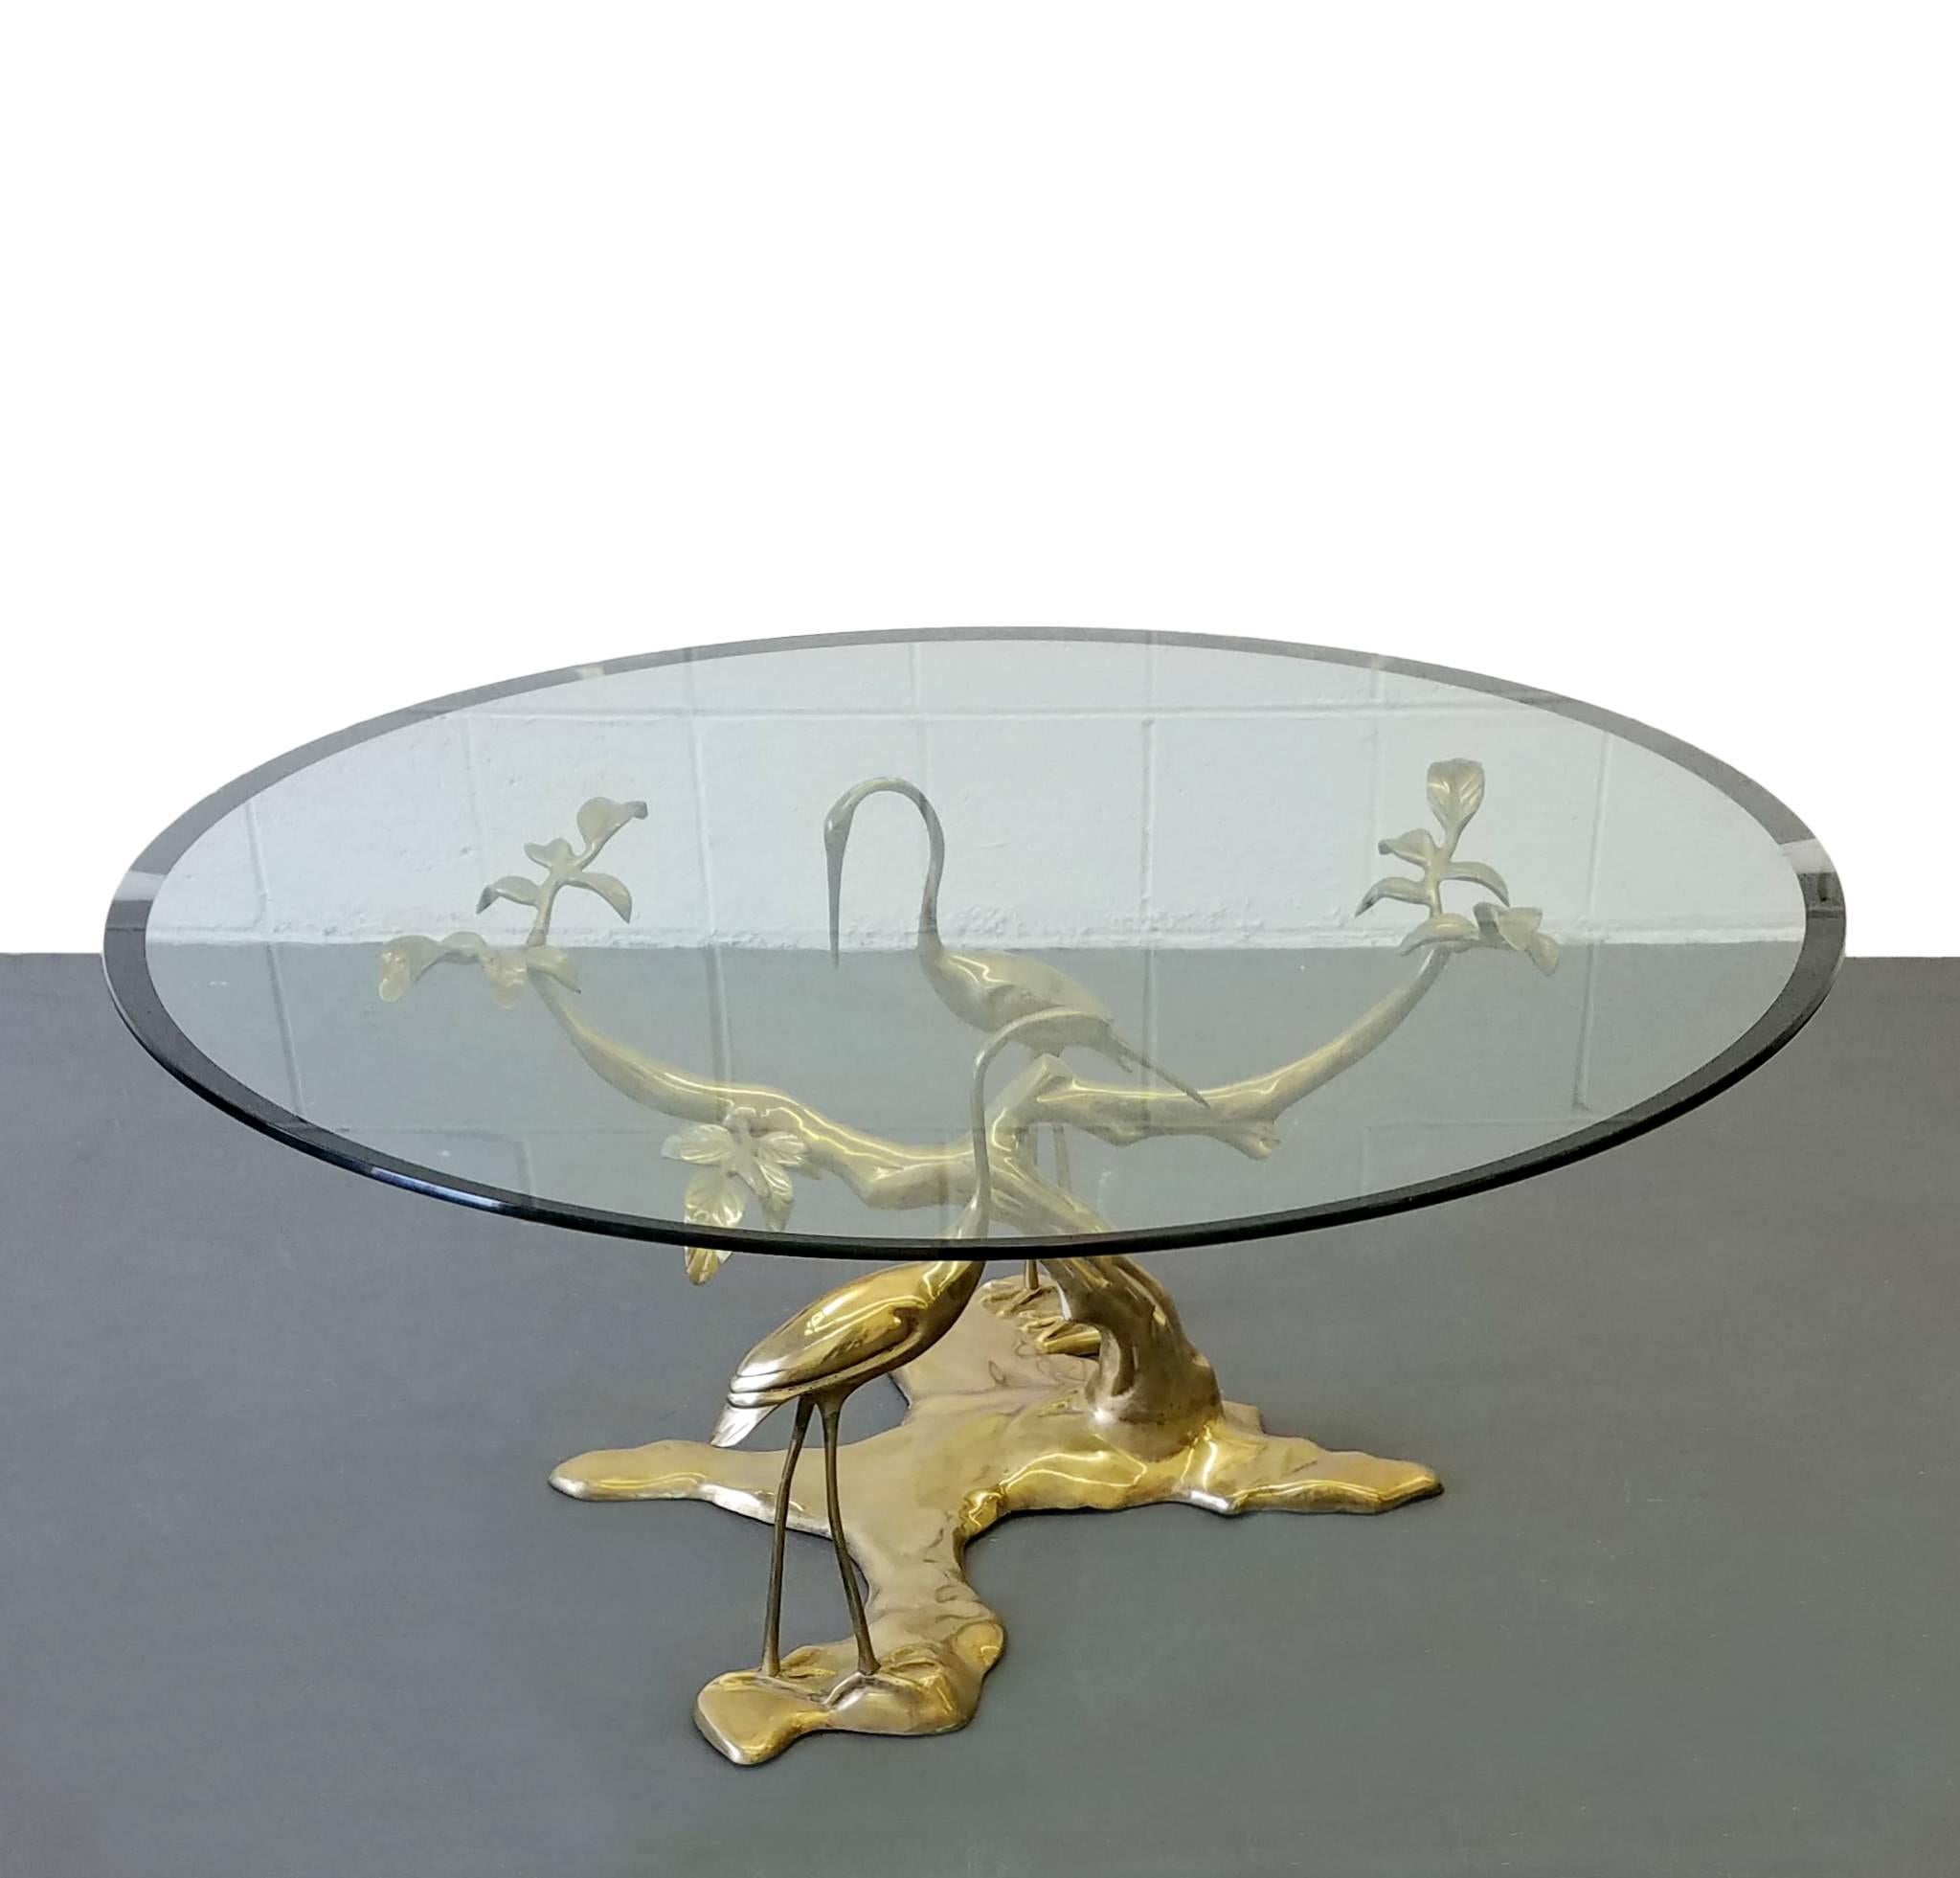 Beautiful solid brass table by Willy Daro. Tree and crane theme. Great centerpiece with lovely light patina.

Base measures: 28 wide x 22 deep x 16 high.